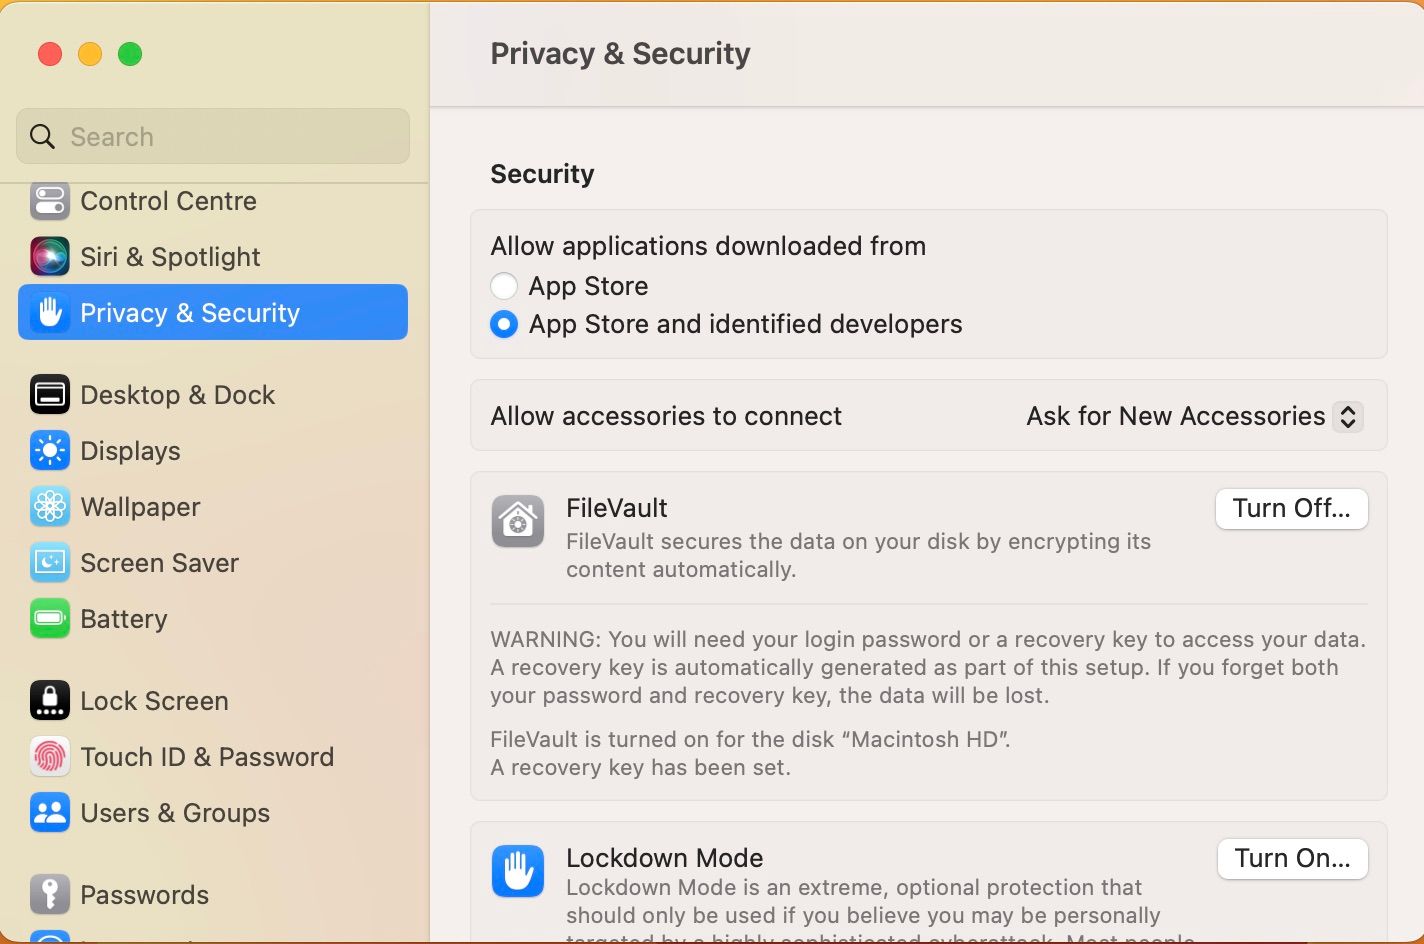 Screenshot of Privacy & Security settings for downloading apps in System Settings